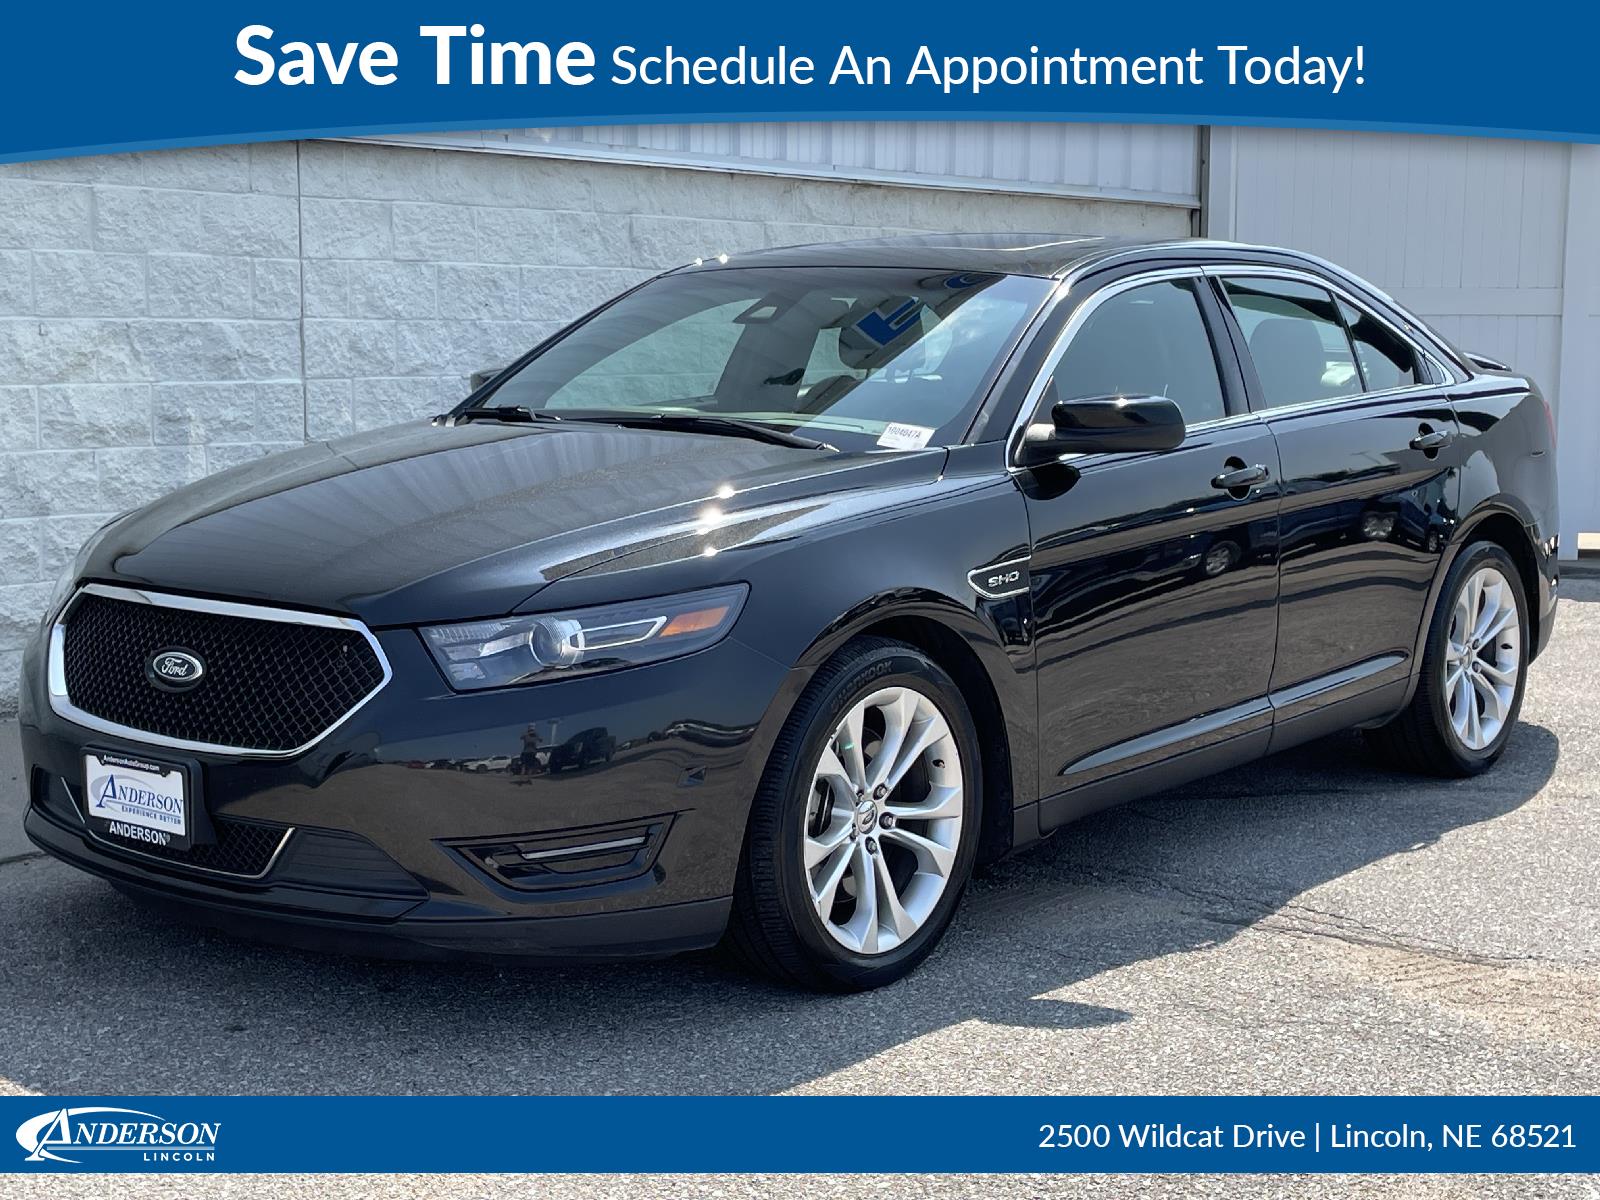 Used 2013 Ford Taurus SHO Stock: 1004047a